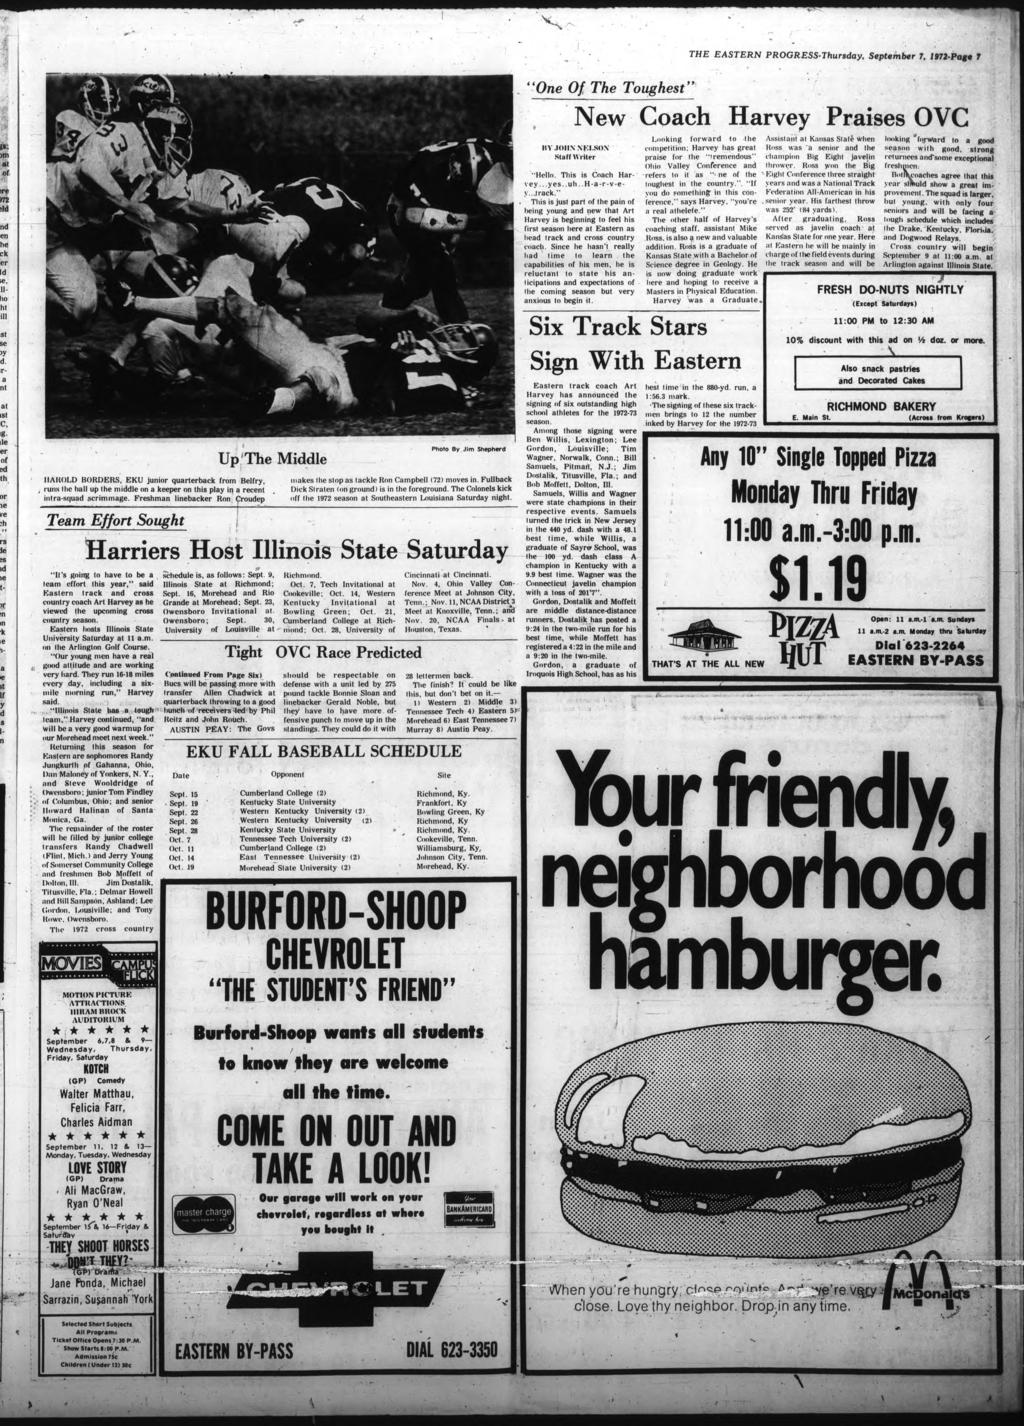 THE EASTERN PROGRESS-Thursday, September 7, 1972-Page 7 AKOLD BORDERS, EKU junor quarterback from Belfry, ; runs he ball up he mddle on a keeper on ths play n a recent ntra-squad.scrmmage.